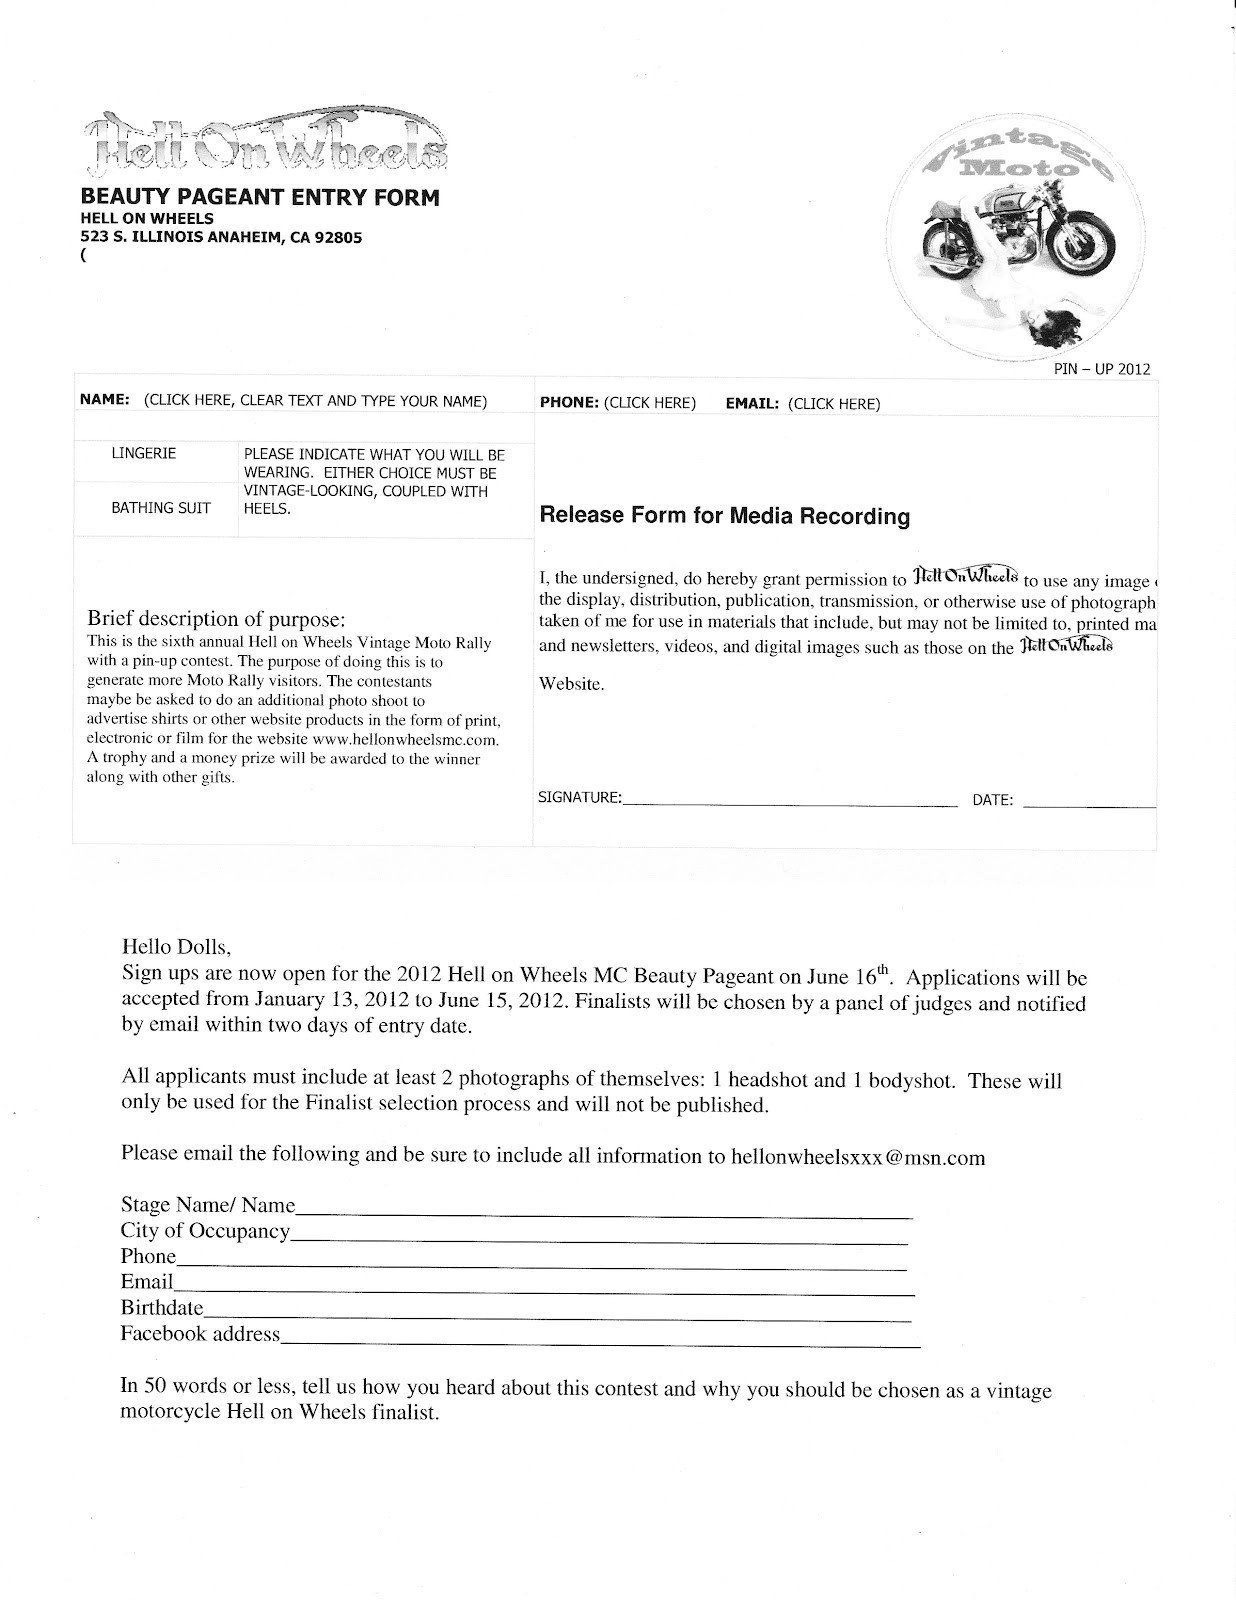 Hell on Wheels MC Blog 2012 PinUp Pageant entry form